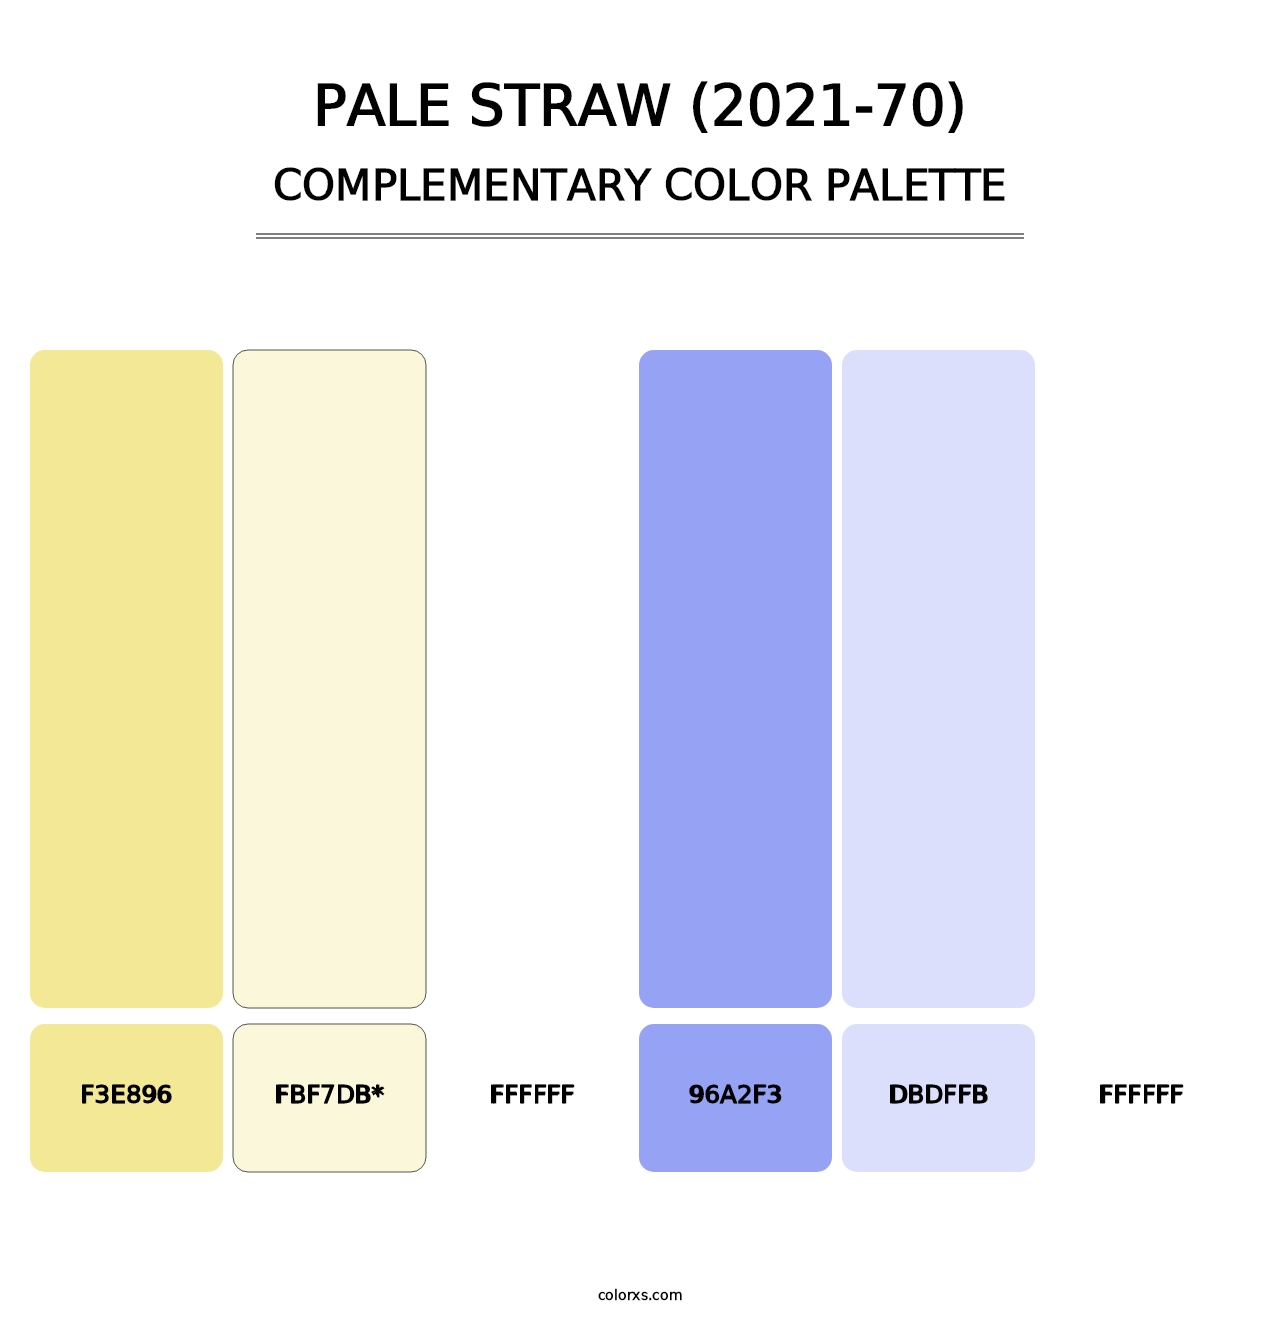 Pale Straw (2021-70) - Complementary Color Palette